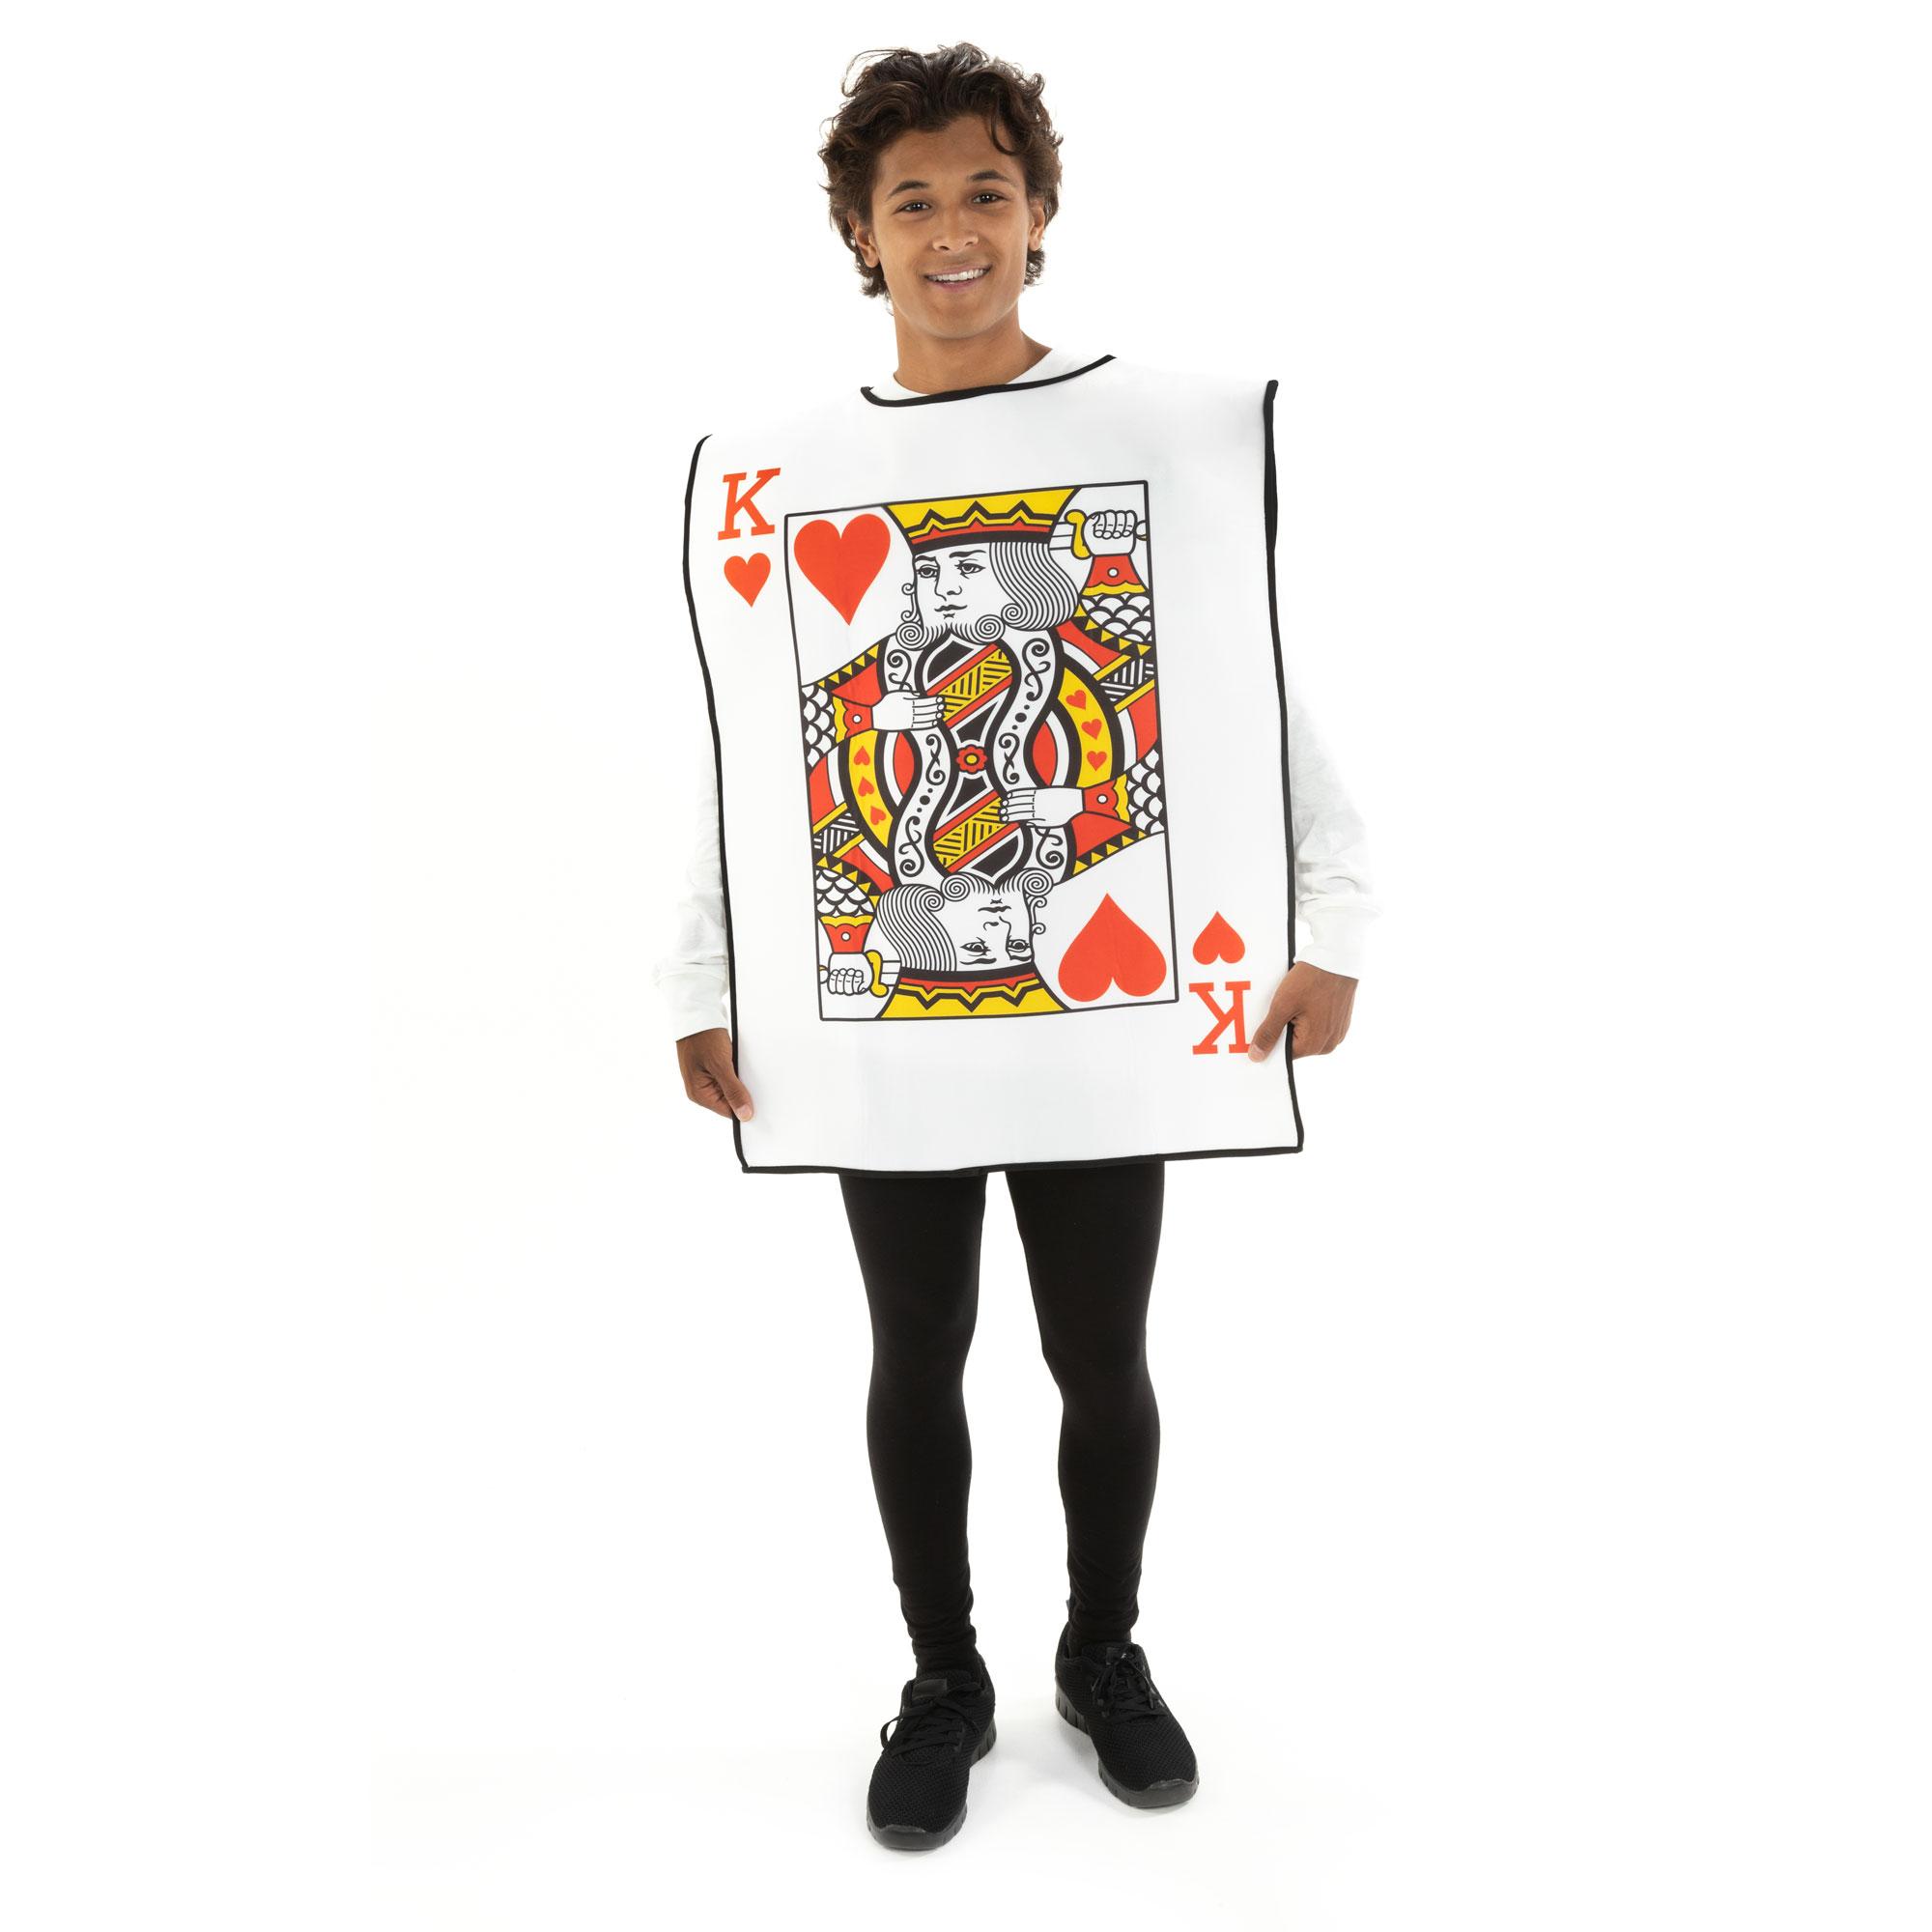 Playing Card King Costume